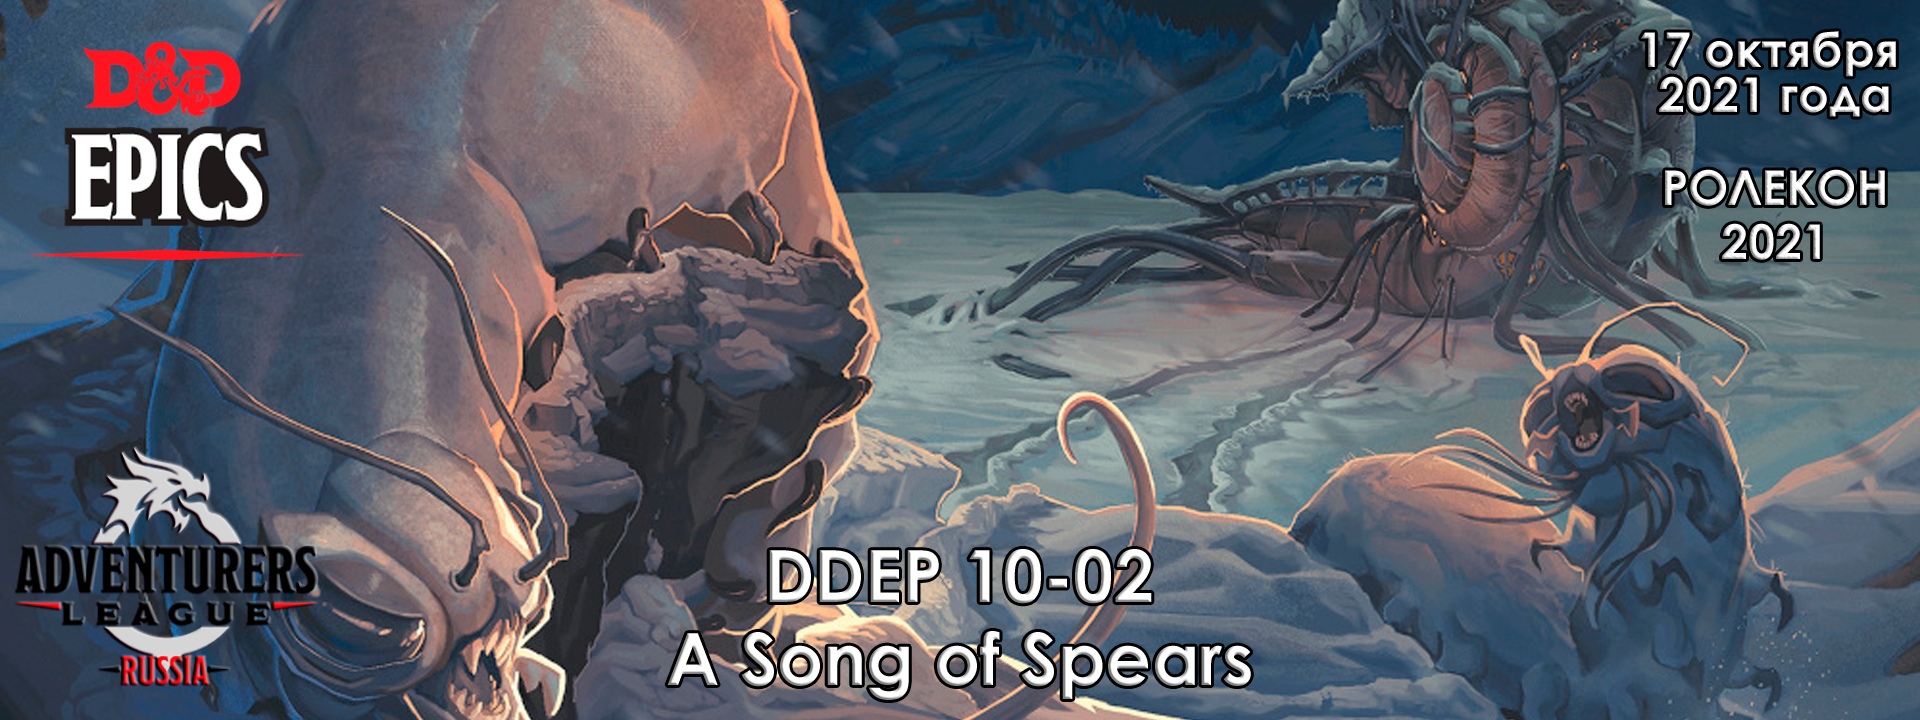 DDEP10-02 A Song of Spears [T3]